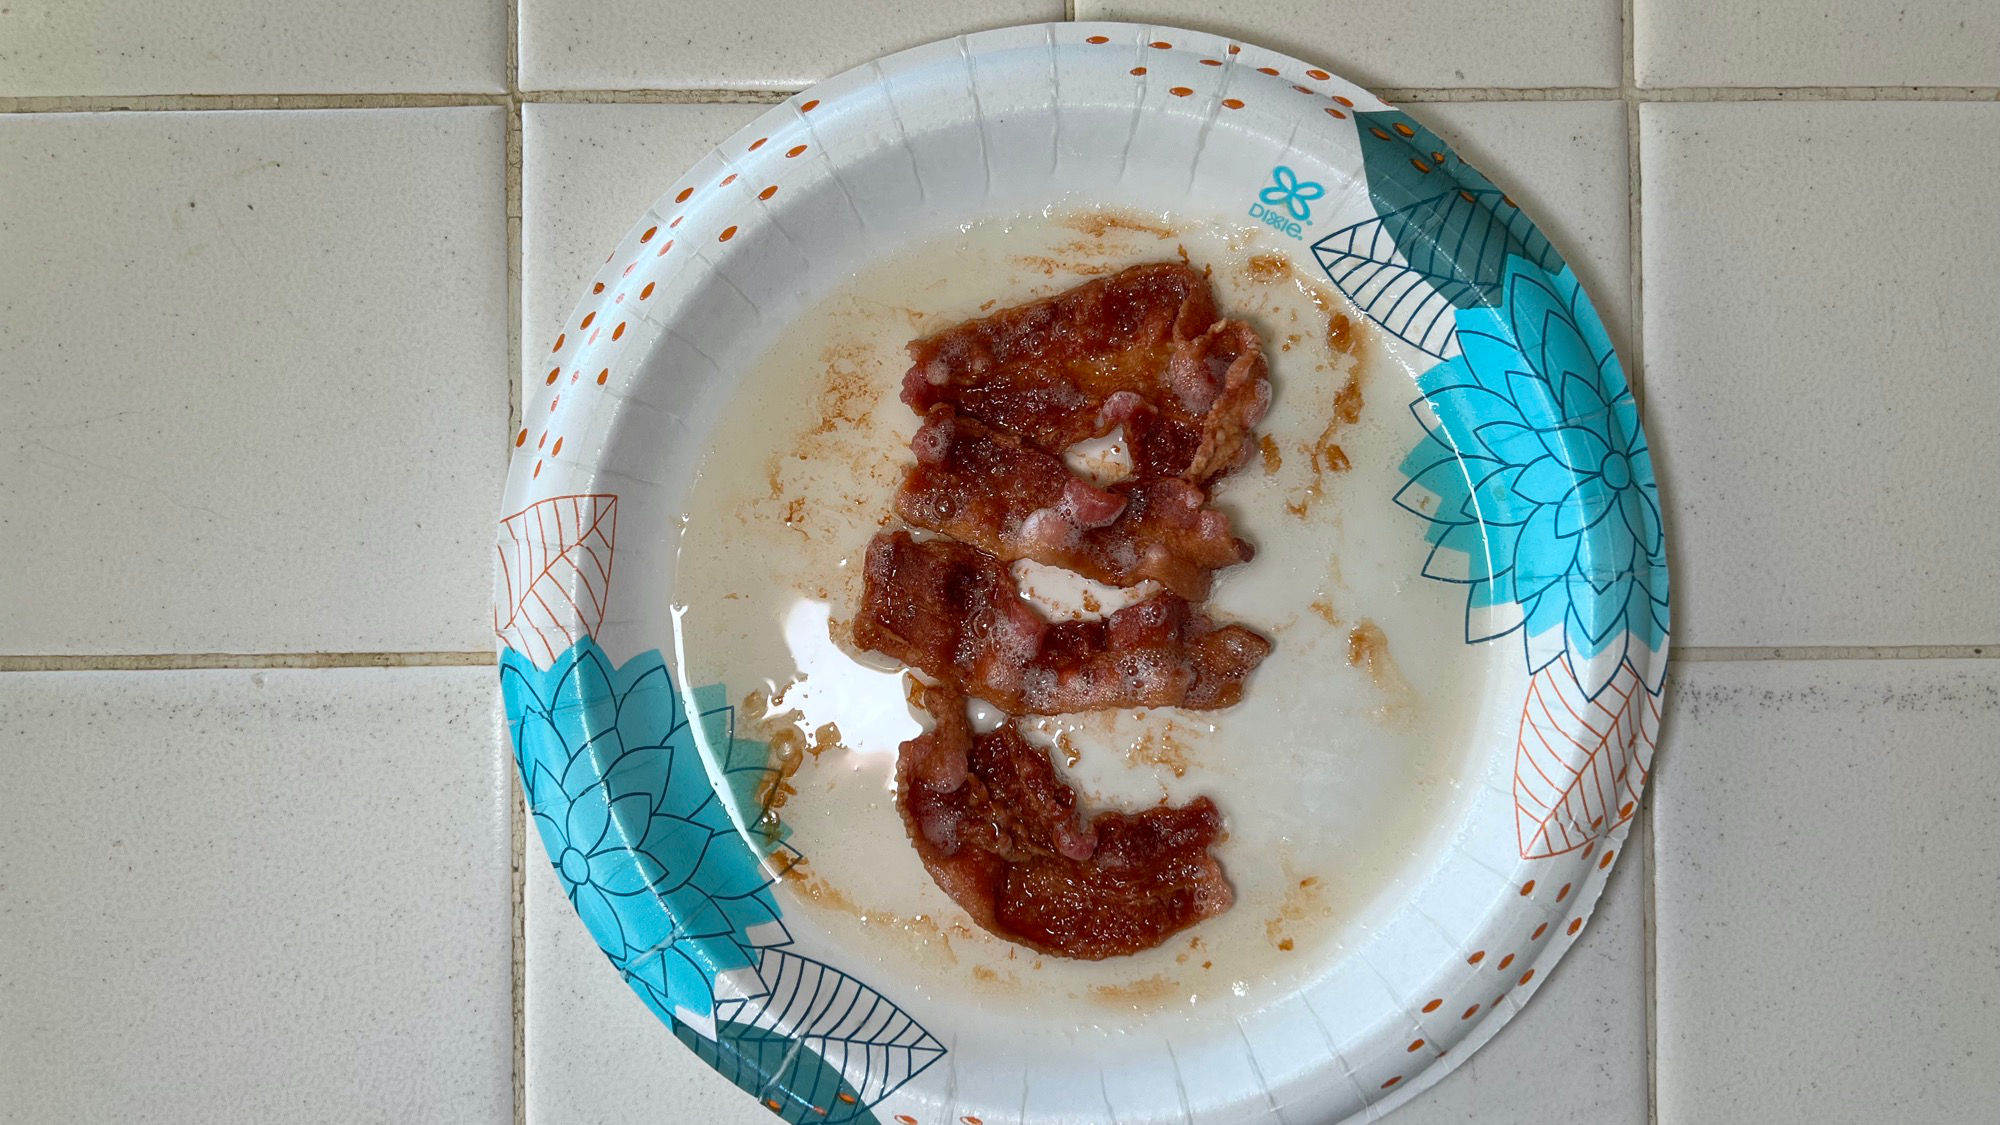 Microwave Oven Bacon 3 Minutes